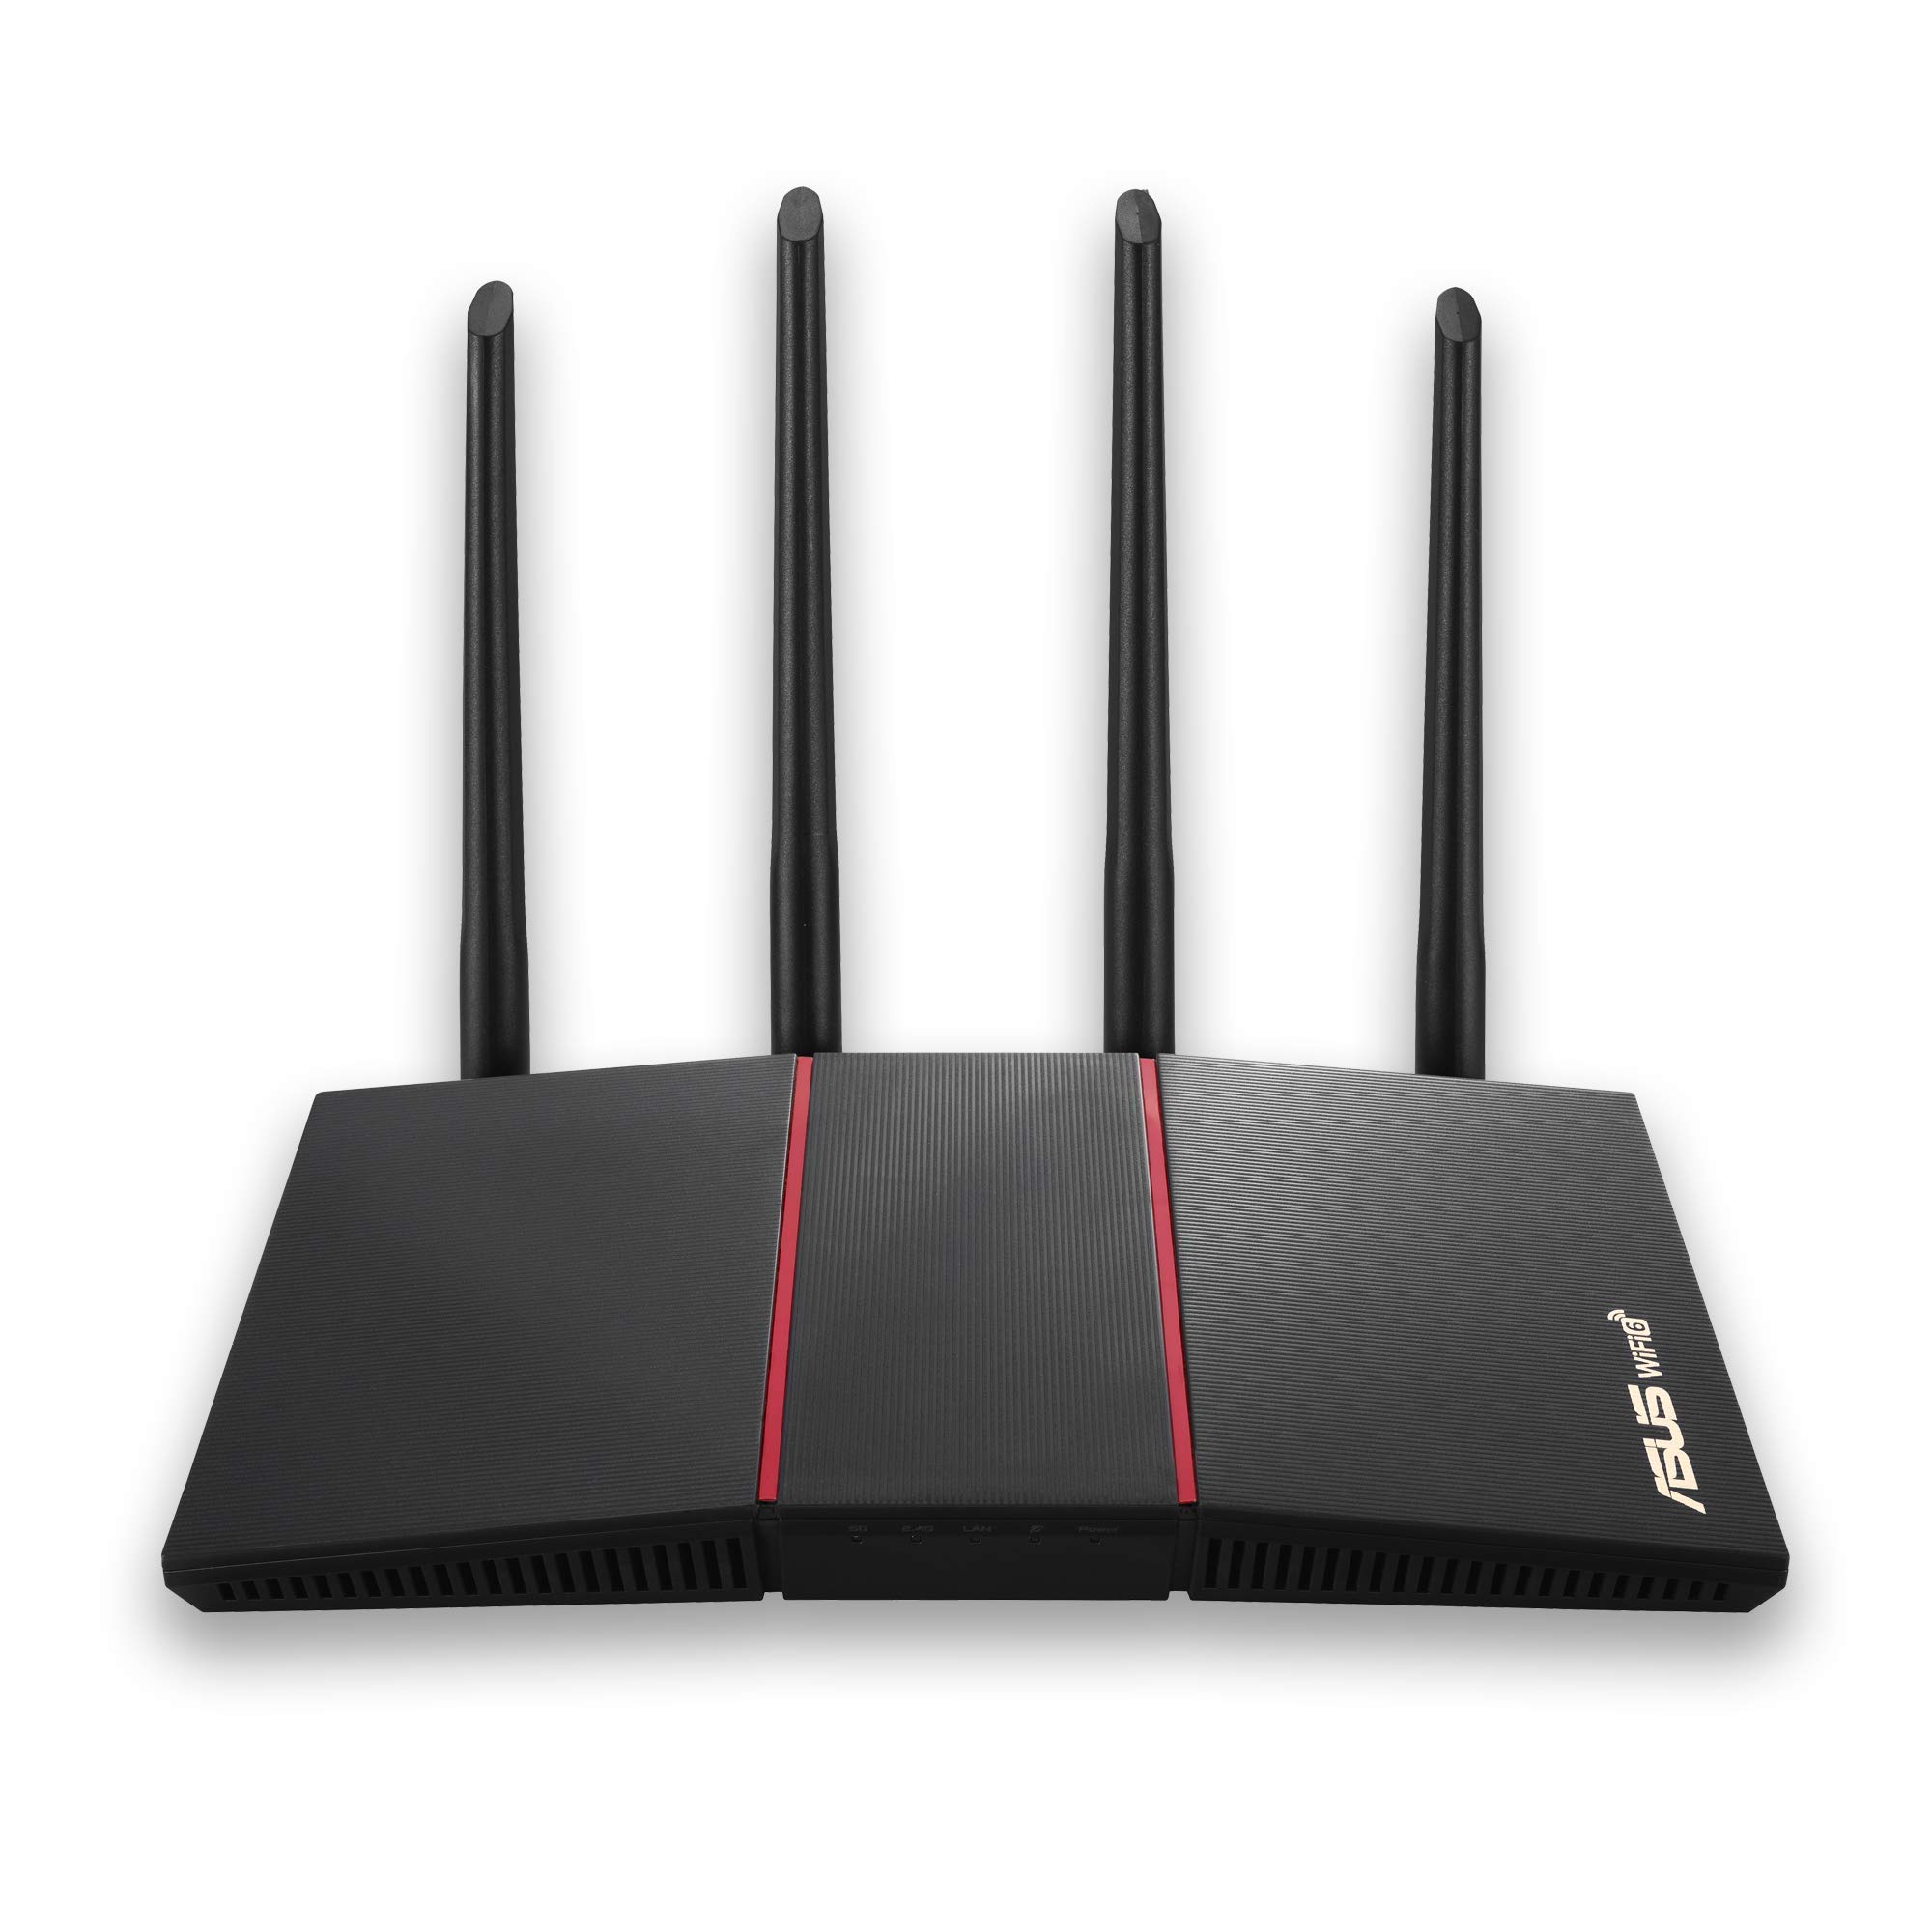 ASUS RT-AX55 (AX1800) Dual Band WiFi 6 Extendable Router, Subscription-free Network Security, Instant Guard, Parental Controls, Built-in VPN, AiMesh Compatible, Gaming & Streaming, Smart Home, black